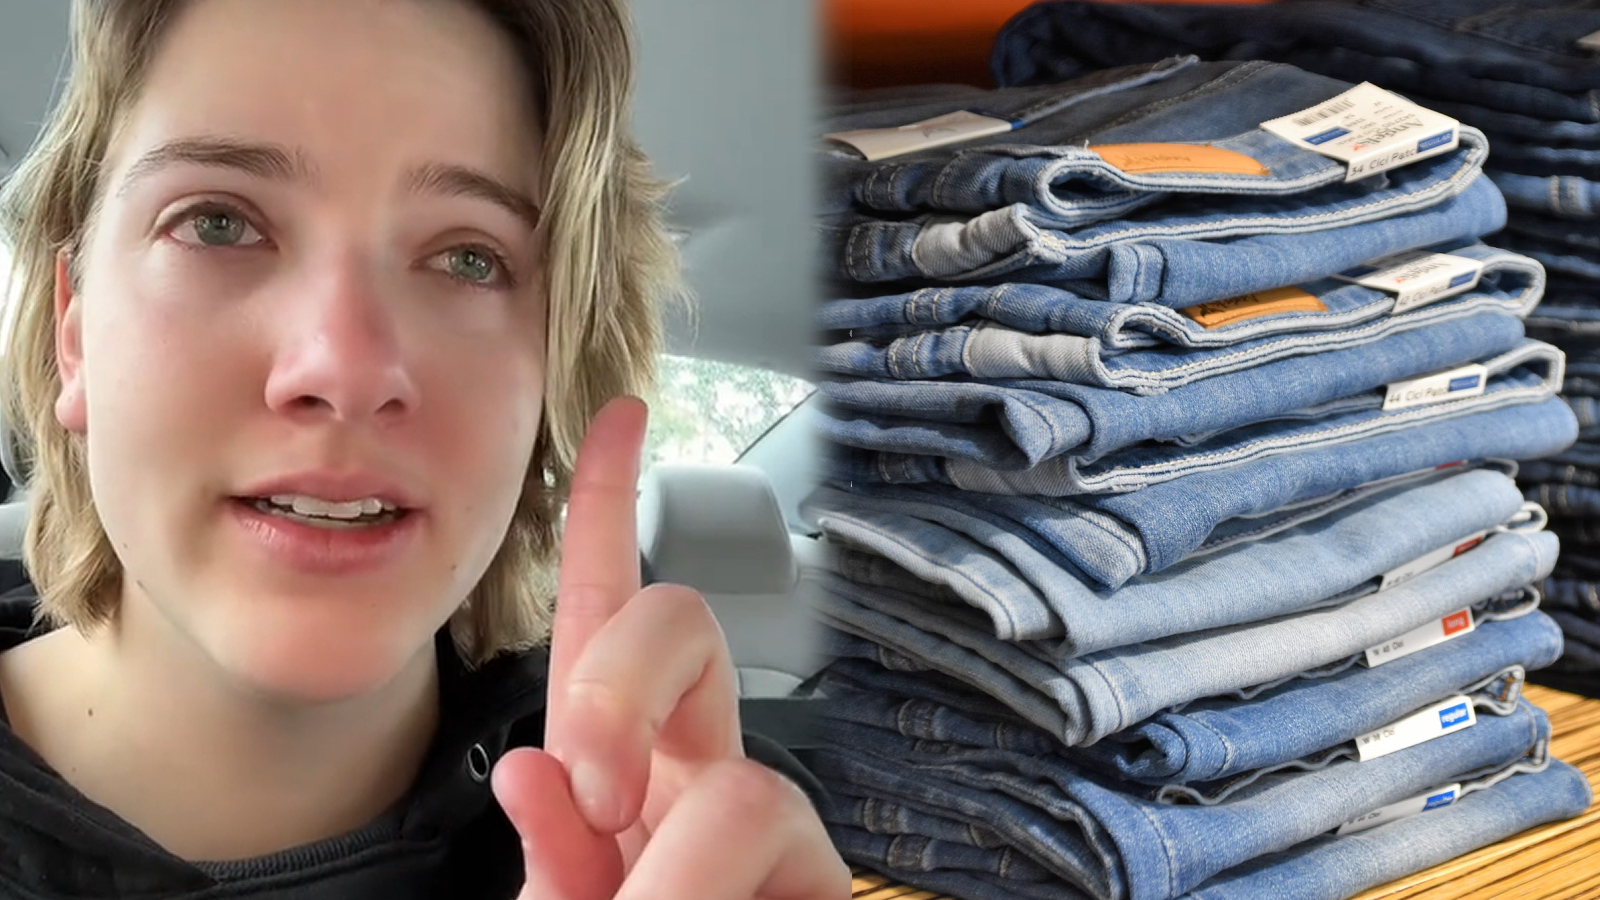 Woman goes viral after breaking down over jeans shopping: “I can’t do it” - Dexerto